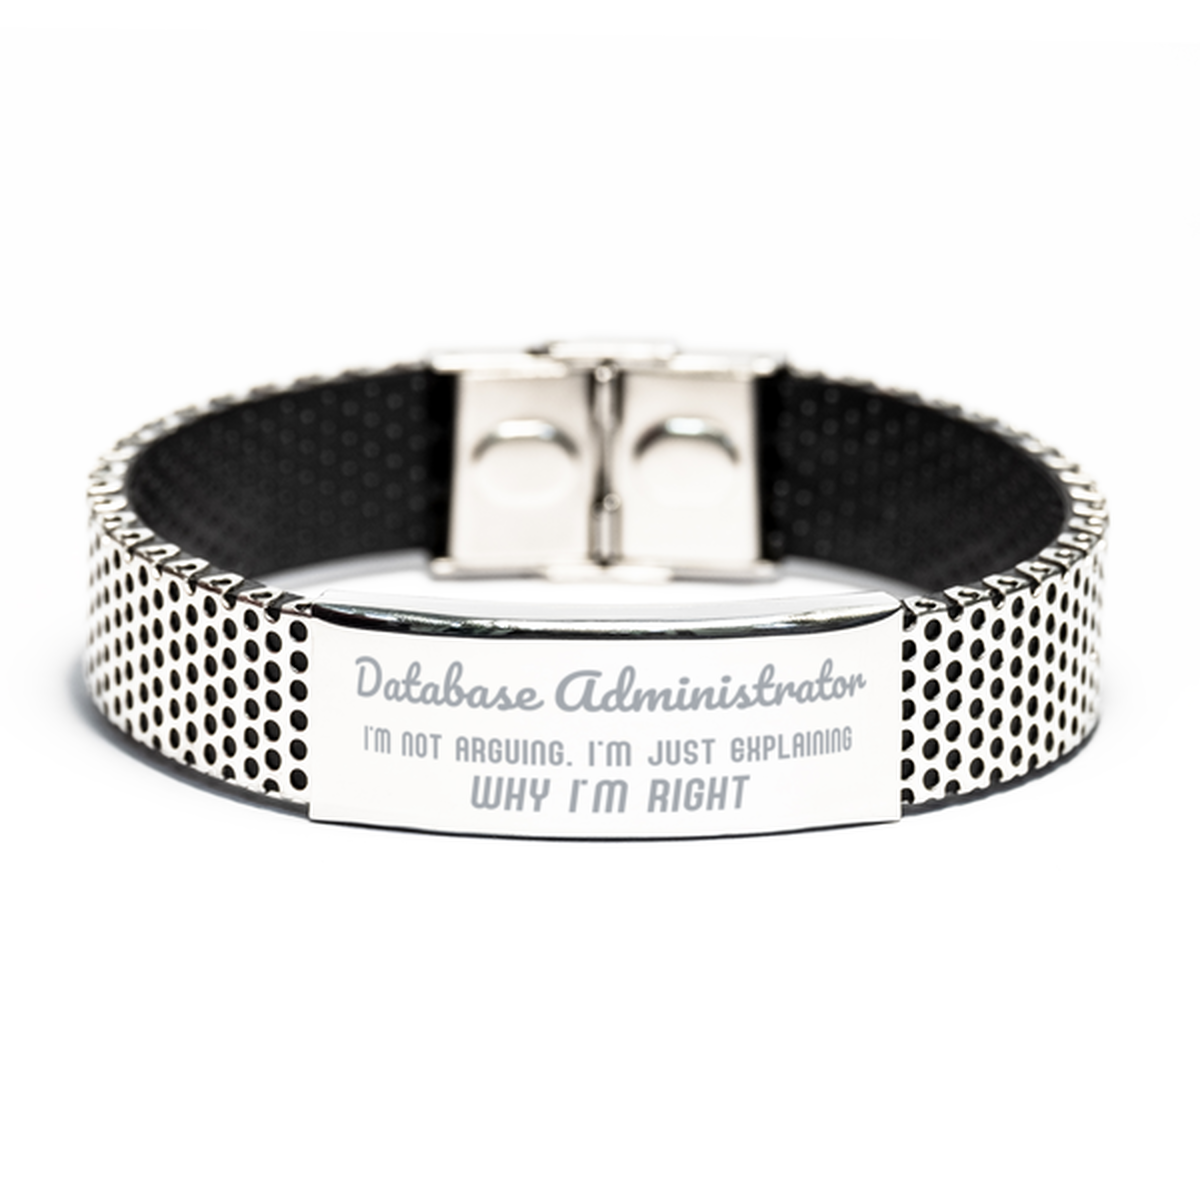 Database Administrator I'm not Arguing. I'm Just Explaining Why I'm RIGHT Stainless Steel Bracelet, Funny Saying Quote Database Administrator Gifts For Database Administrator Graduation Birthday Christmas Gifts for Men Women Coworker